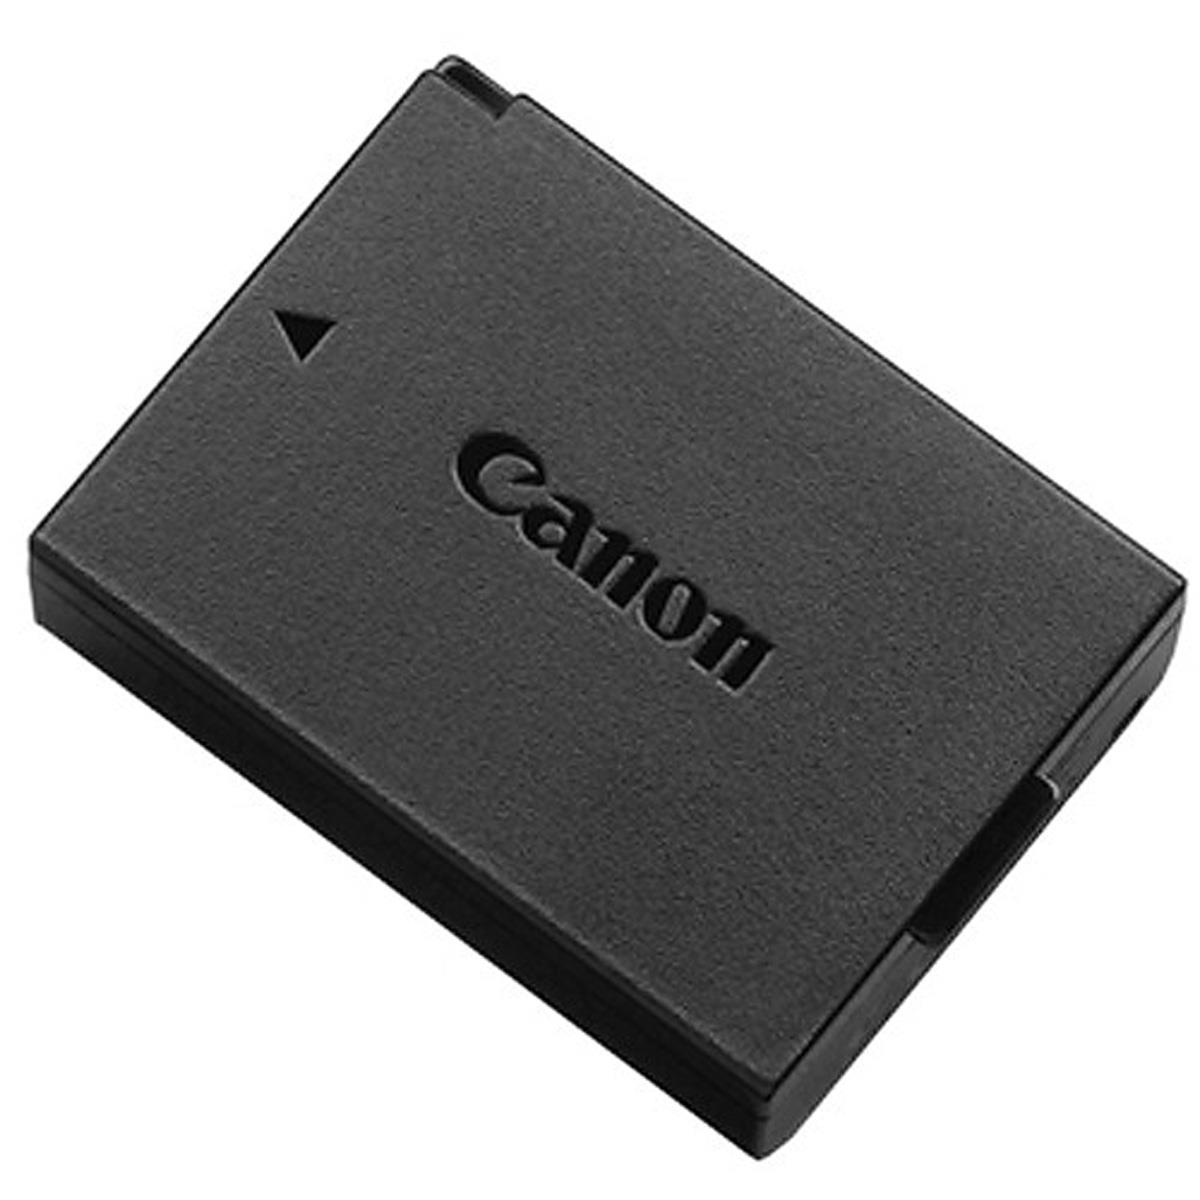 Image of Canon LP-E10 860mAh Lithium-Ion Battery Pack for EOS Rebel T3